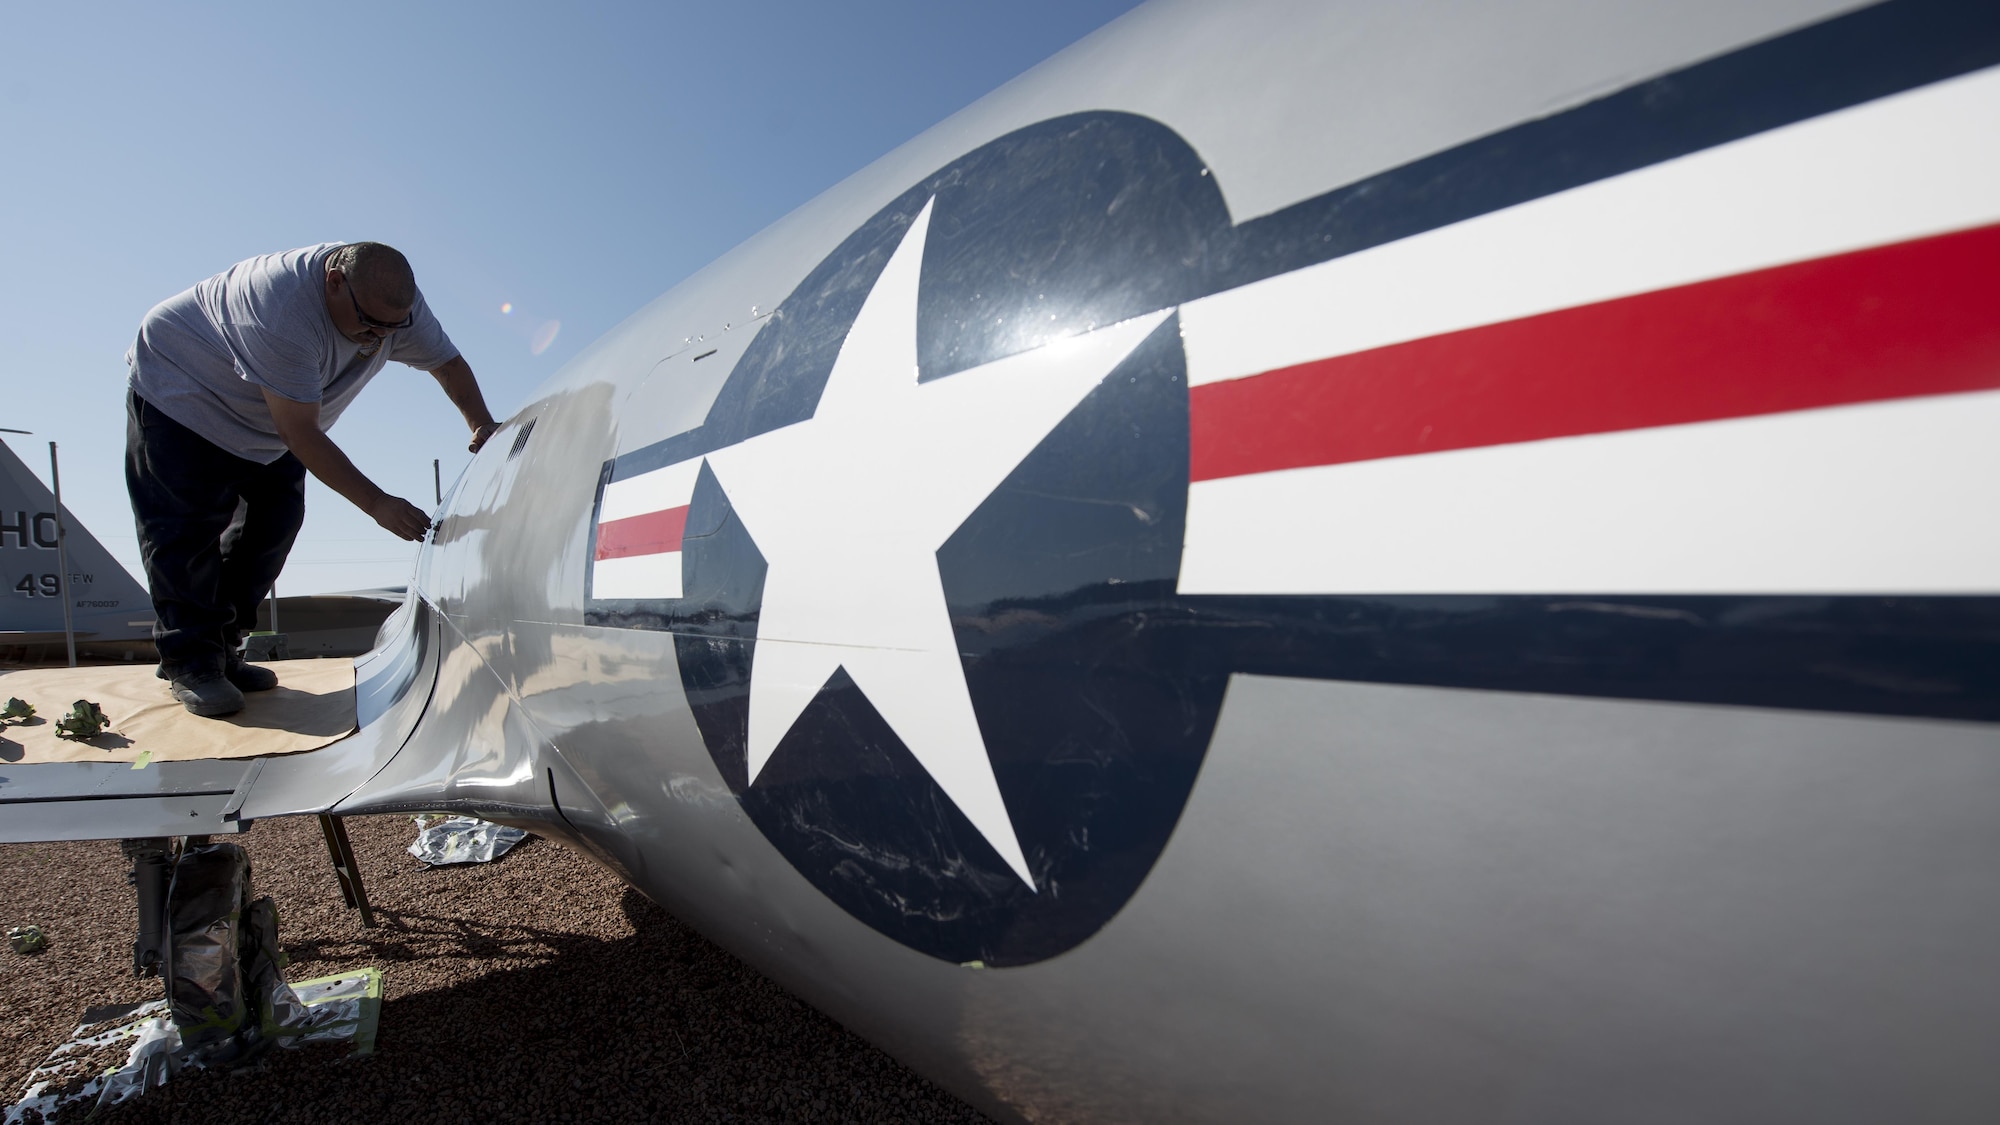 Carlos, an M1 Support Systems aircraft corrosion specialist at Holloman Air Force Base N.M., removes tape used for painting straight lines on a P-80B Shooting Star at Heritage Park here May 16. The P-80B Shooting Star was the first U.S. Air Force jet to be used in combat. This particular jet, Serial Number 49-853, flew combat missions during the Korean War. (Last names are being withheld do to operational requirements) (U.S. Air Force photo by Airman 1st Class Randahl J. Jenson)